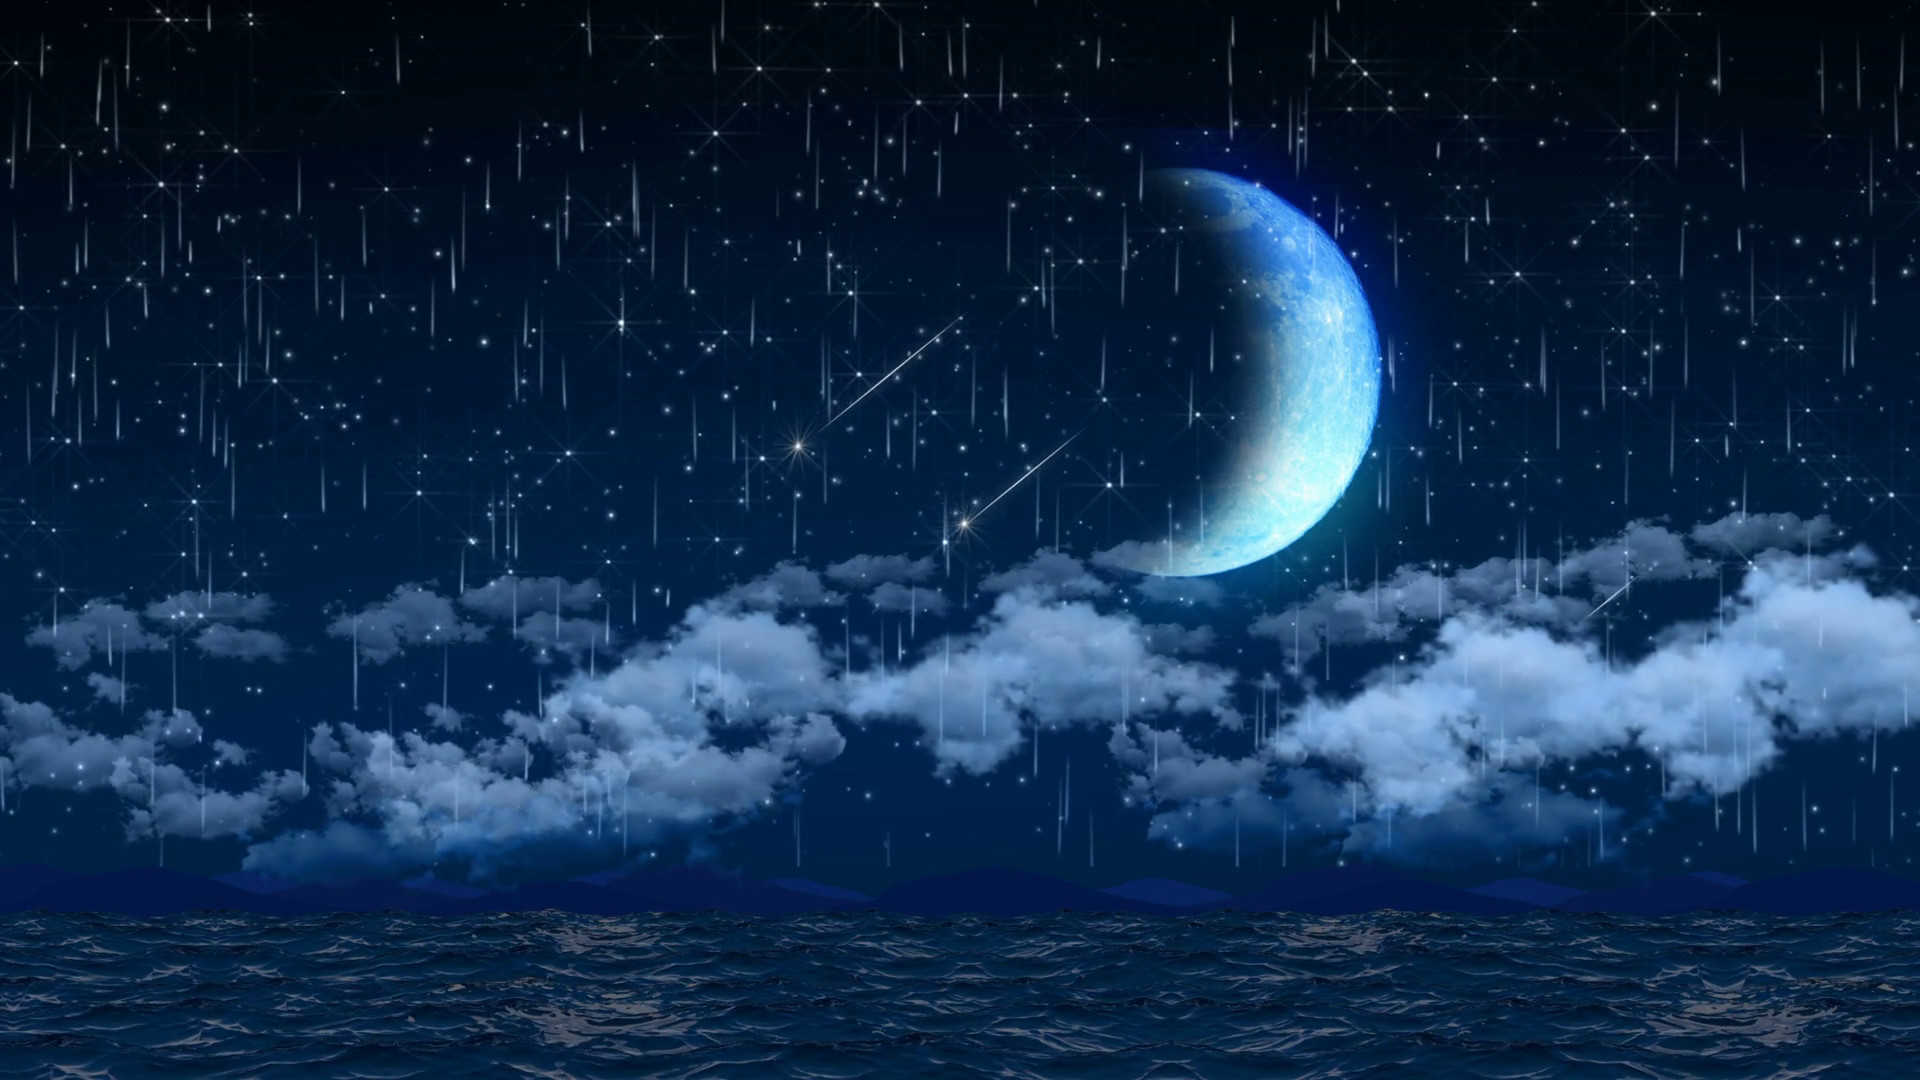 1920x1080 Seamless 3d animation of night sky with clouds and falling star light and  giant crescent moon. Blue sea in seascape landscape scene background in  fantasy ...